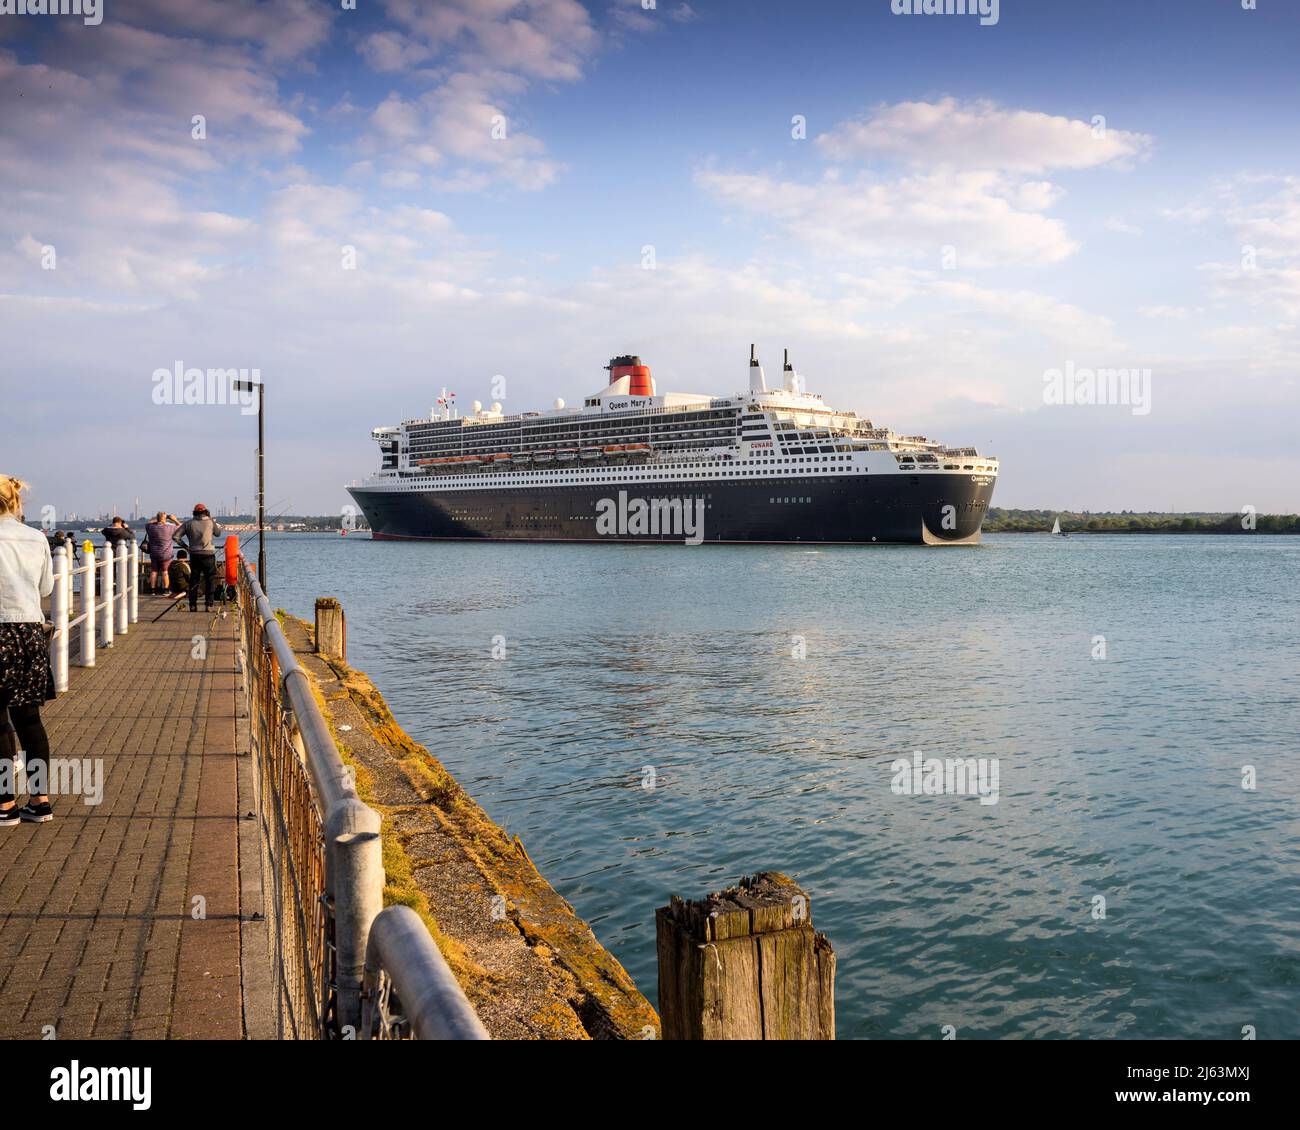 Cunard liner Queen Mary 2 passing the Town Quay as she departs Southampton for New York on 24 April 2022. Southampton, England Stock Photo